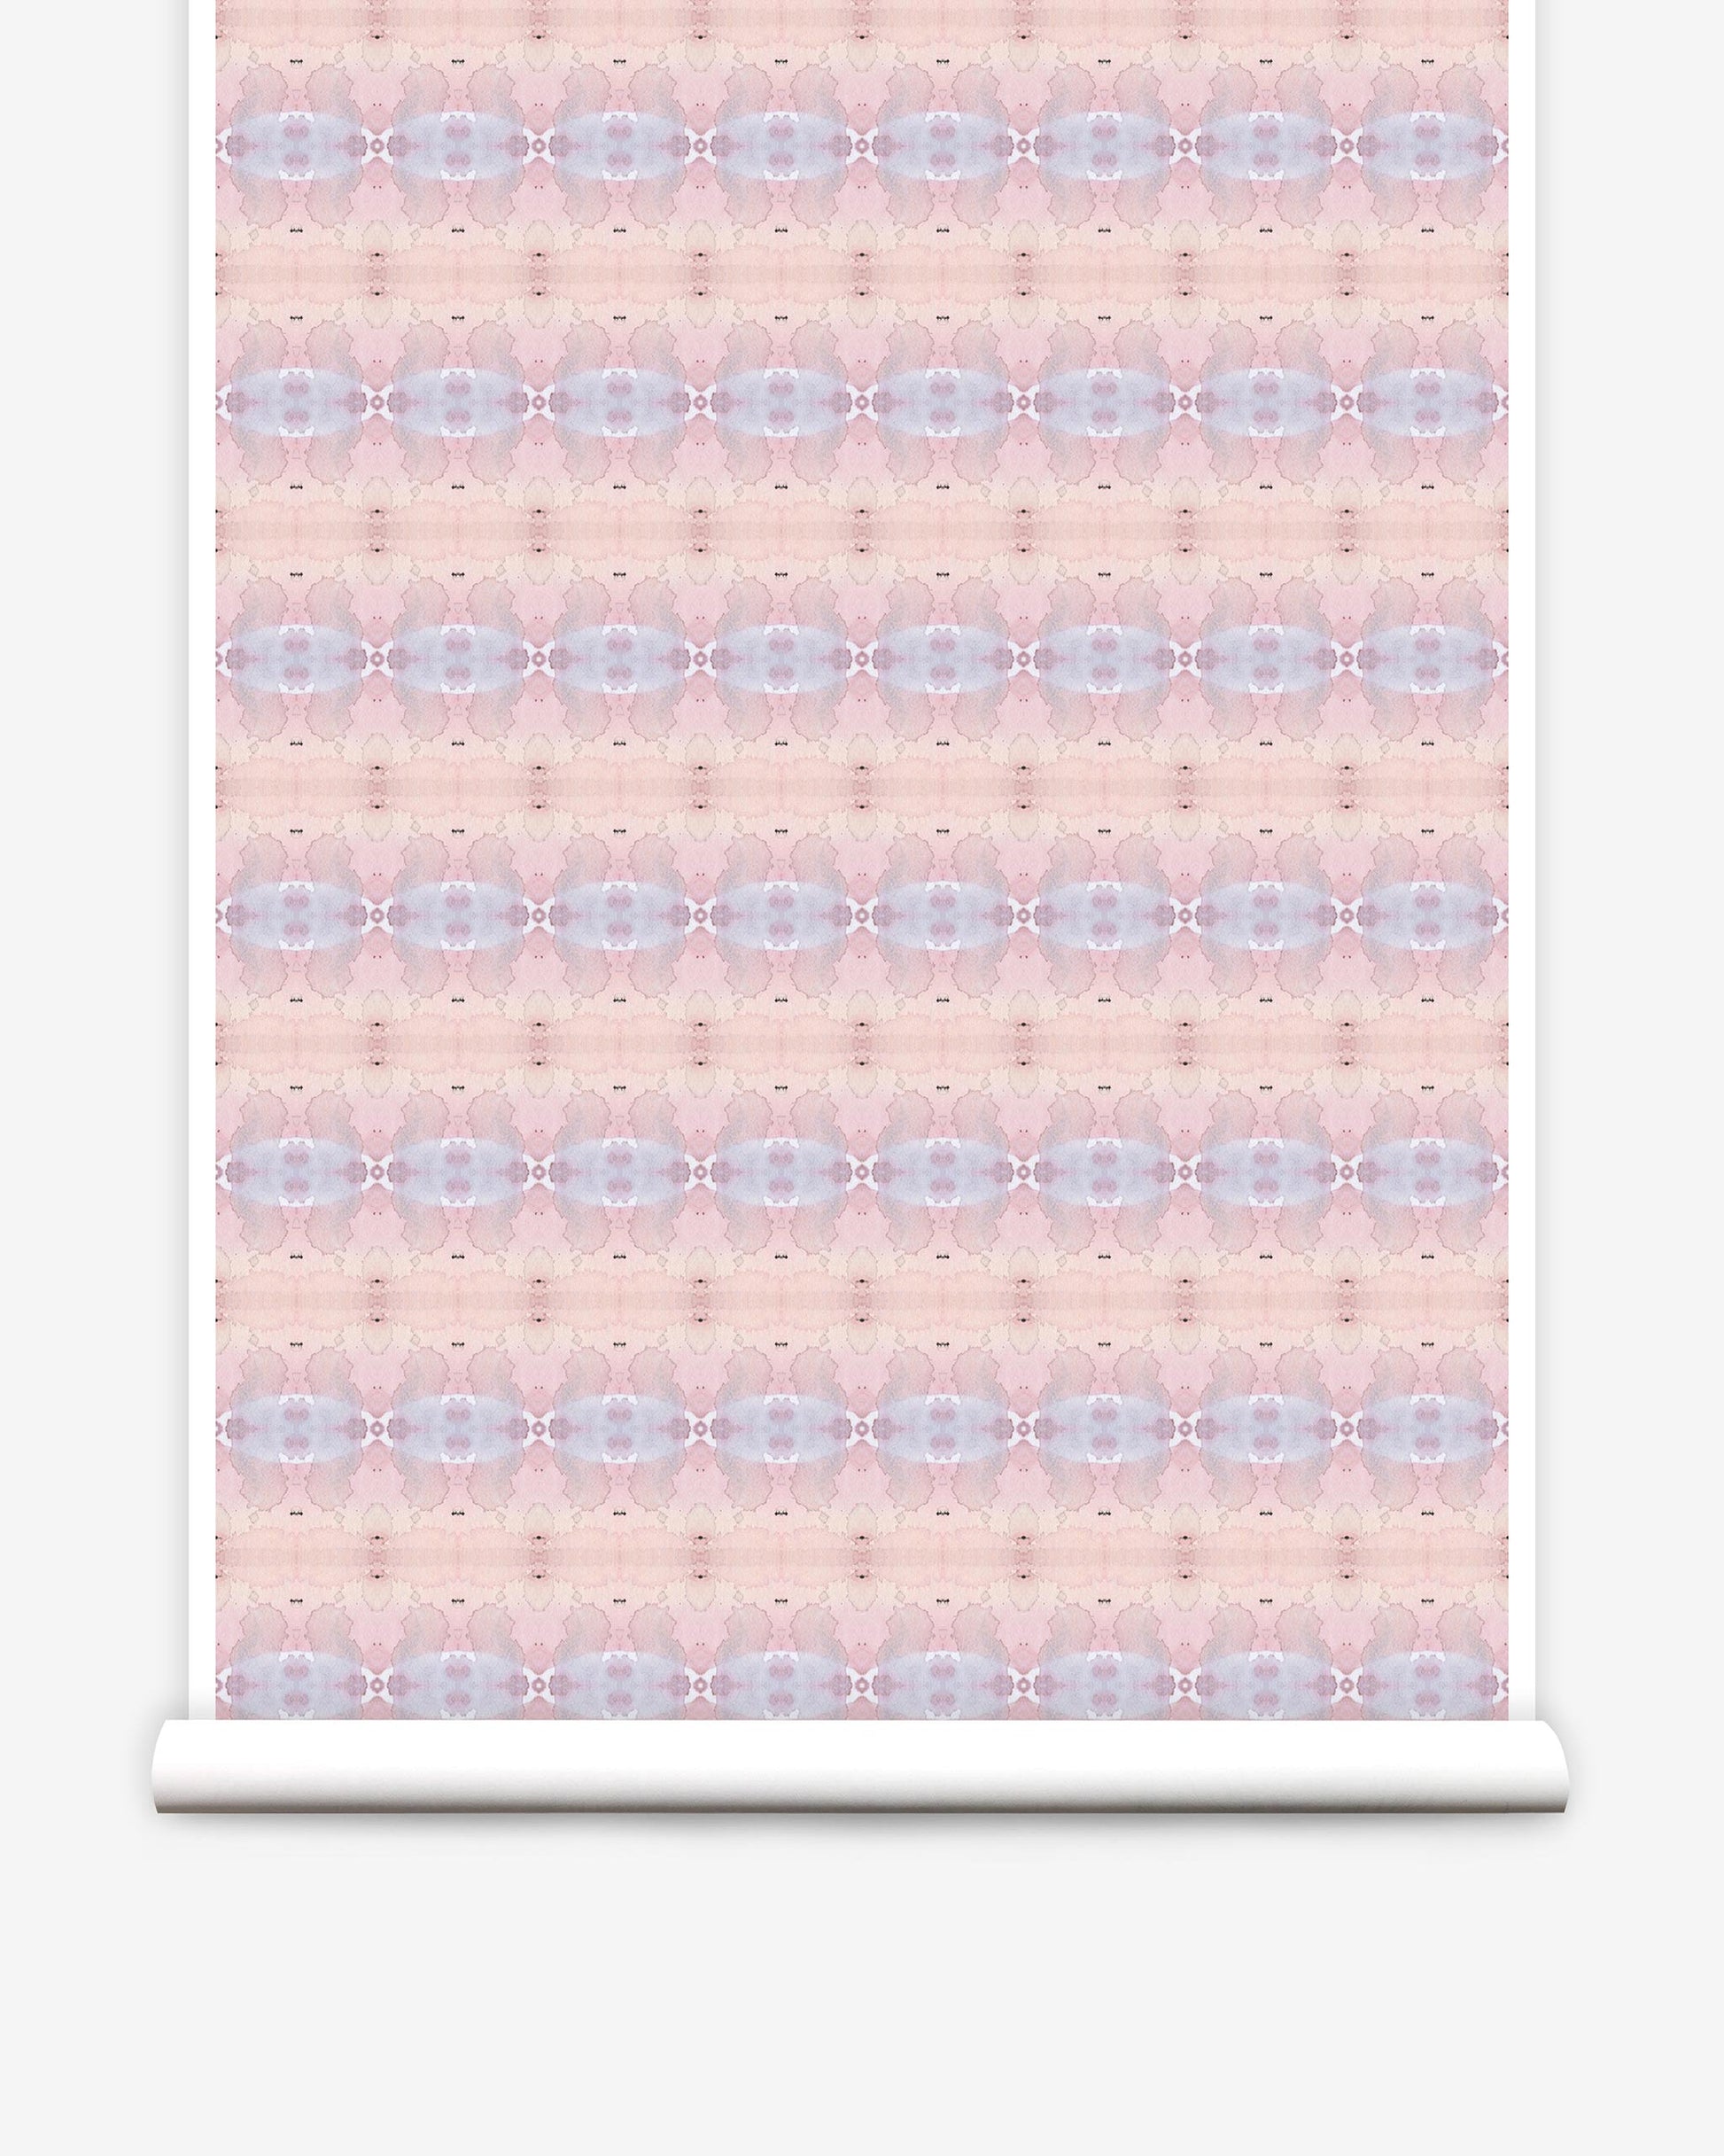 A pink and blue abstract pattern on wallpaper, inspired by the American West, the Setting Sun Wallpaper is reminiscent of a light raspberry hueon wallpaper